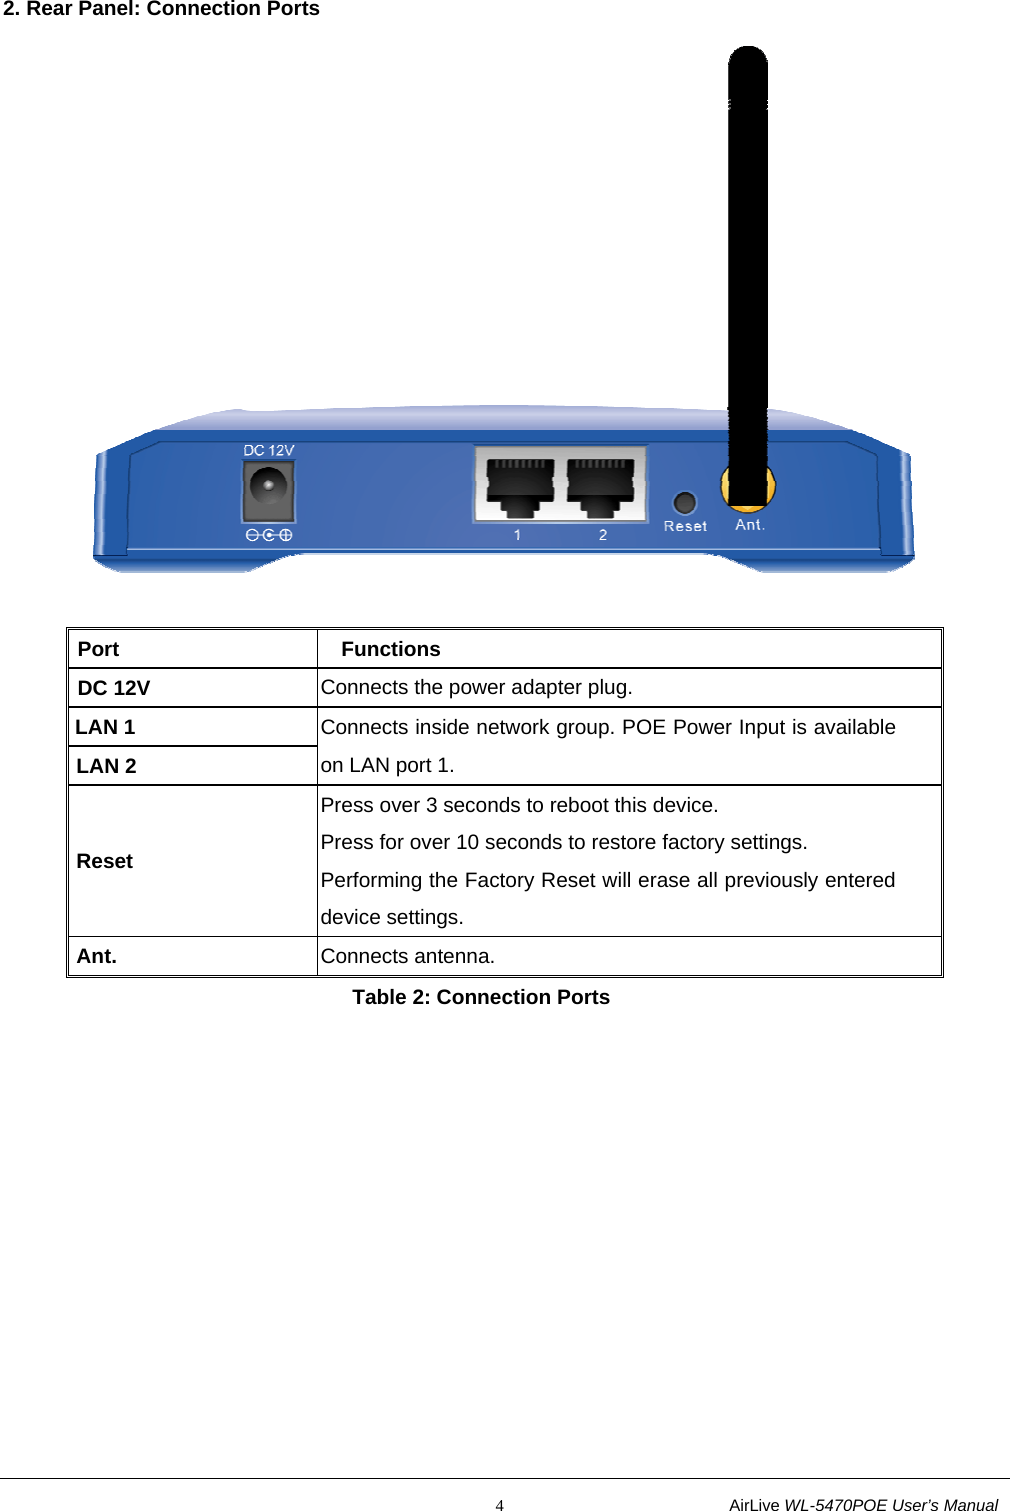                                                           4                           AirLive WL-5470POE User’s Manual 2. Rear Panel: Connection Ports   Port    Functions DC 12V    Connects the power adapter plug. LAN 1  Connects inside network group. POE Power Input is available on LAN port 1. LAN 2 Reset Press over 3 seconds to reboot this device. Press for over 10 seconds to restore factory settings.   Performing the Factory Reset will erase all previously entered device settings. Ant.  Connects antenna. Table 2: Connection Ports 